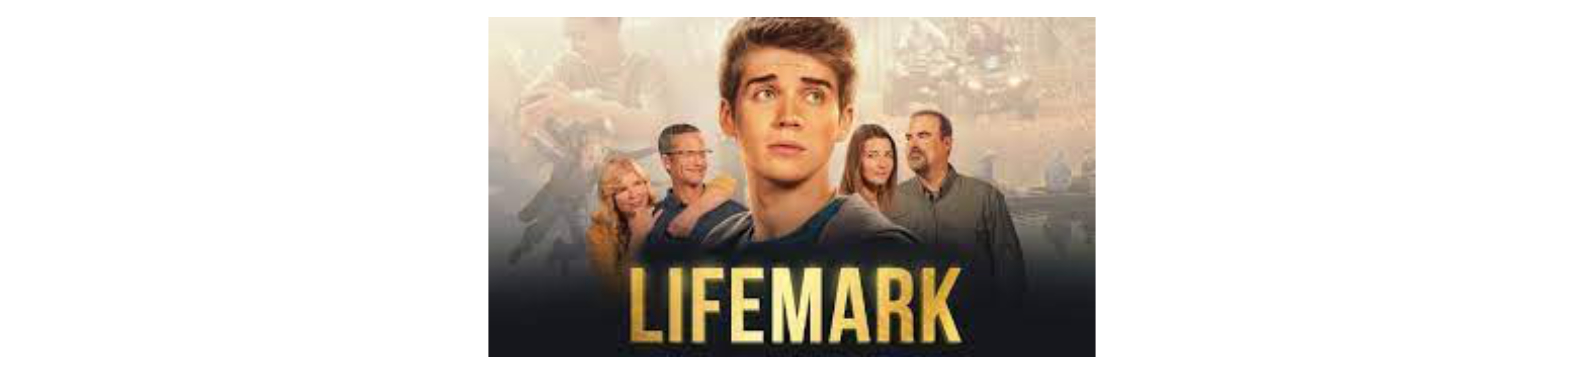 Lifemark Movie graphic showing a family around a young man